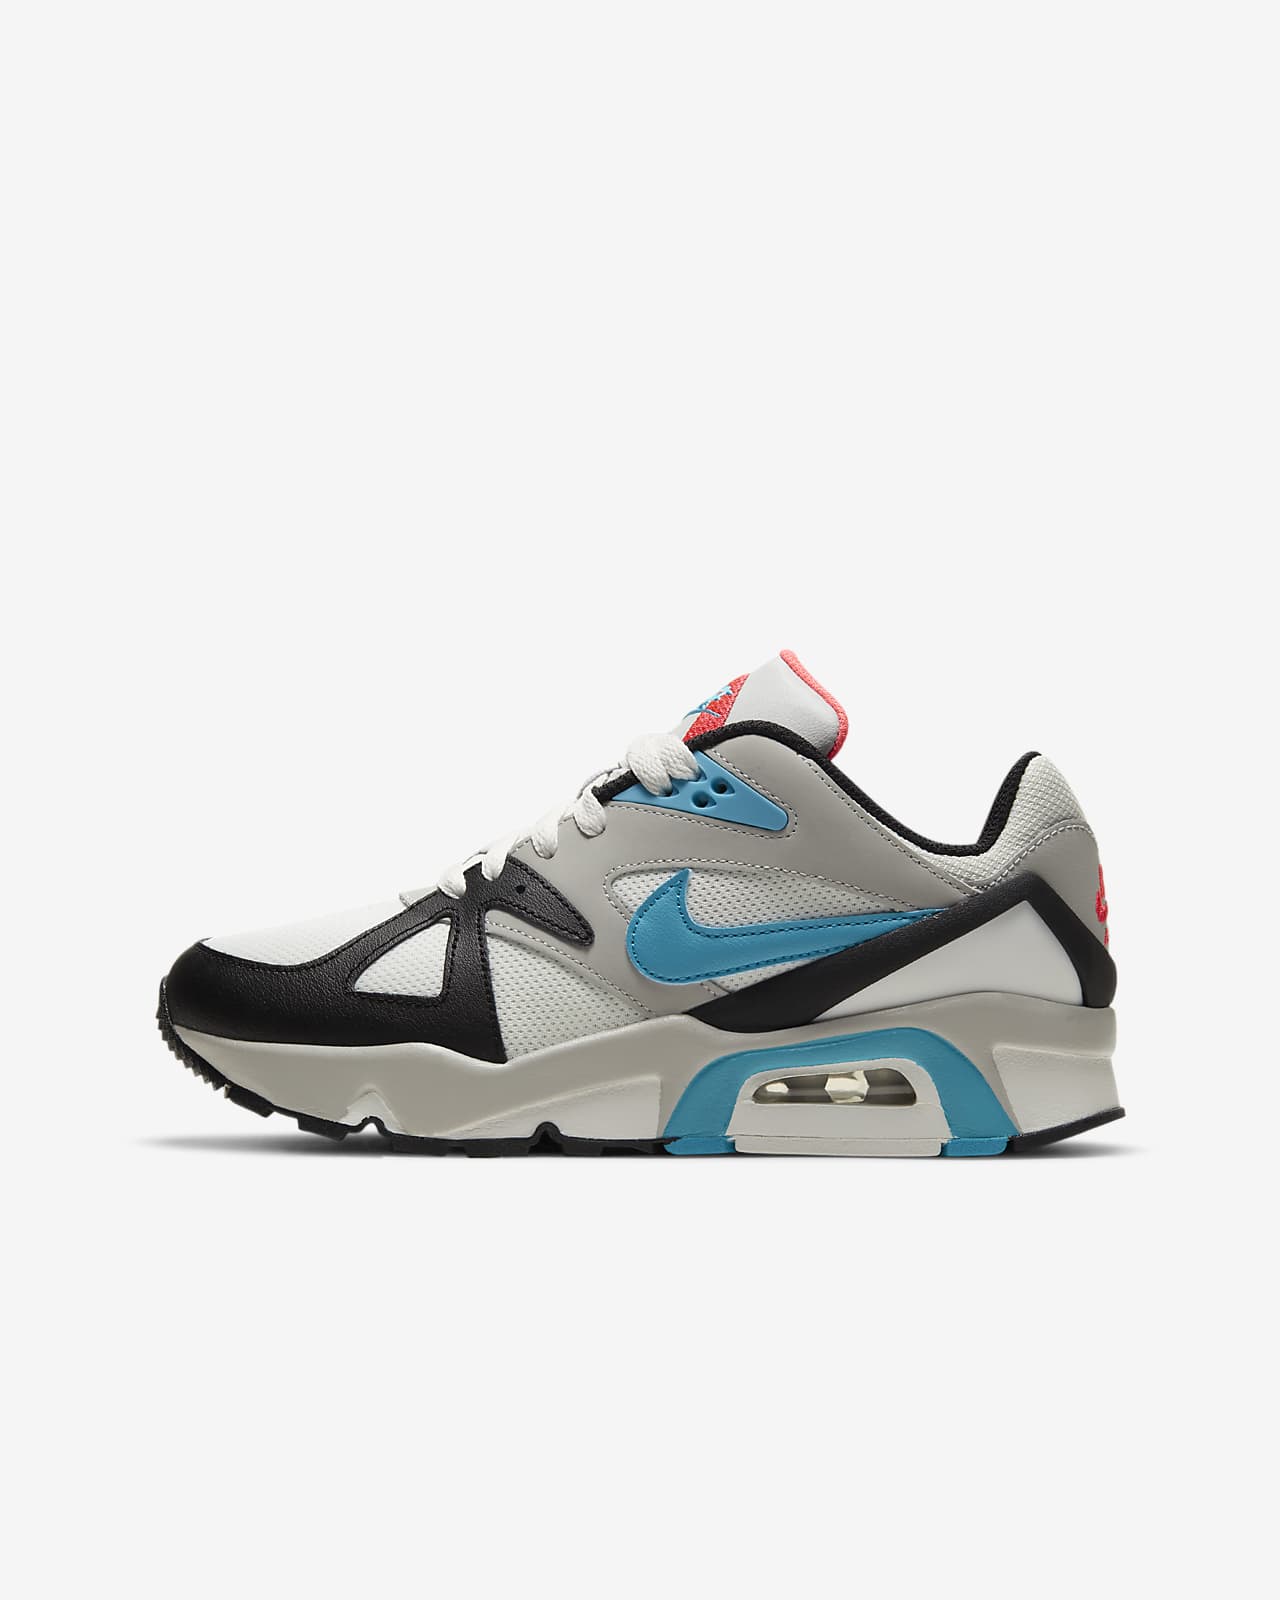 GS Nike Air Structure 'Neo Teal / Infrared' $59.97 Free Shipping ...